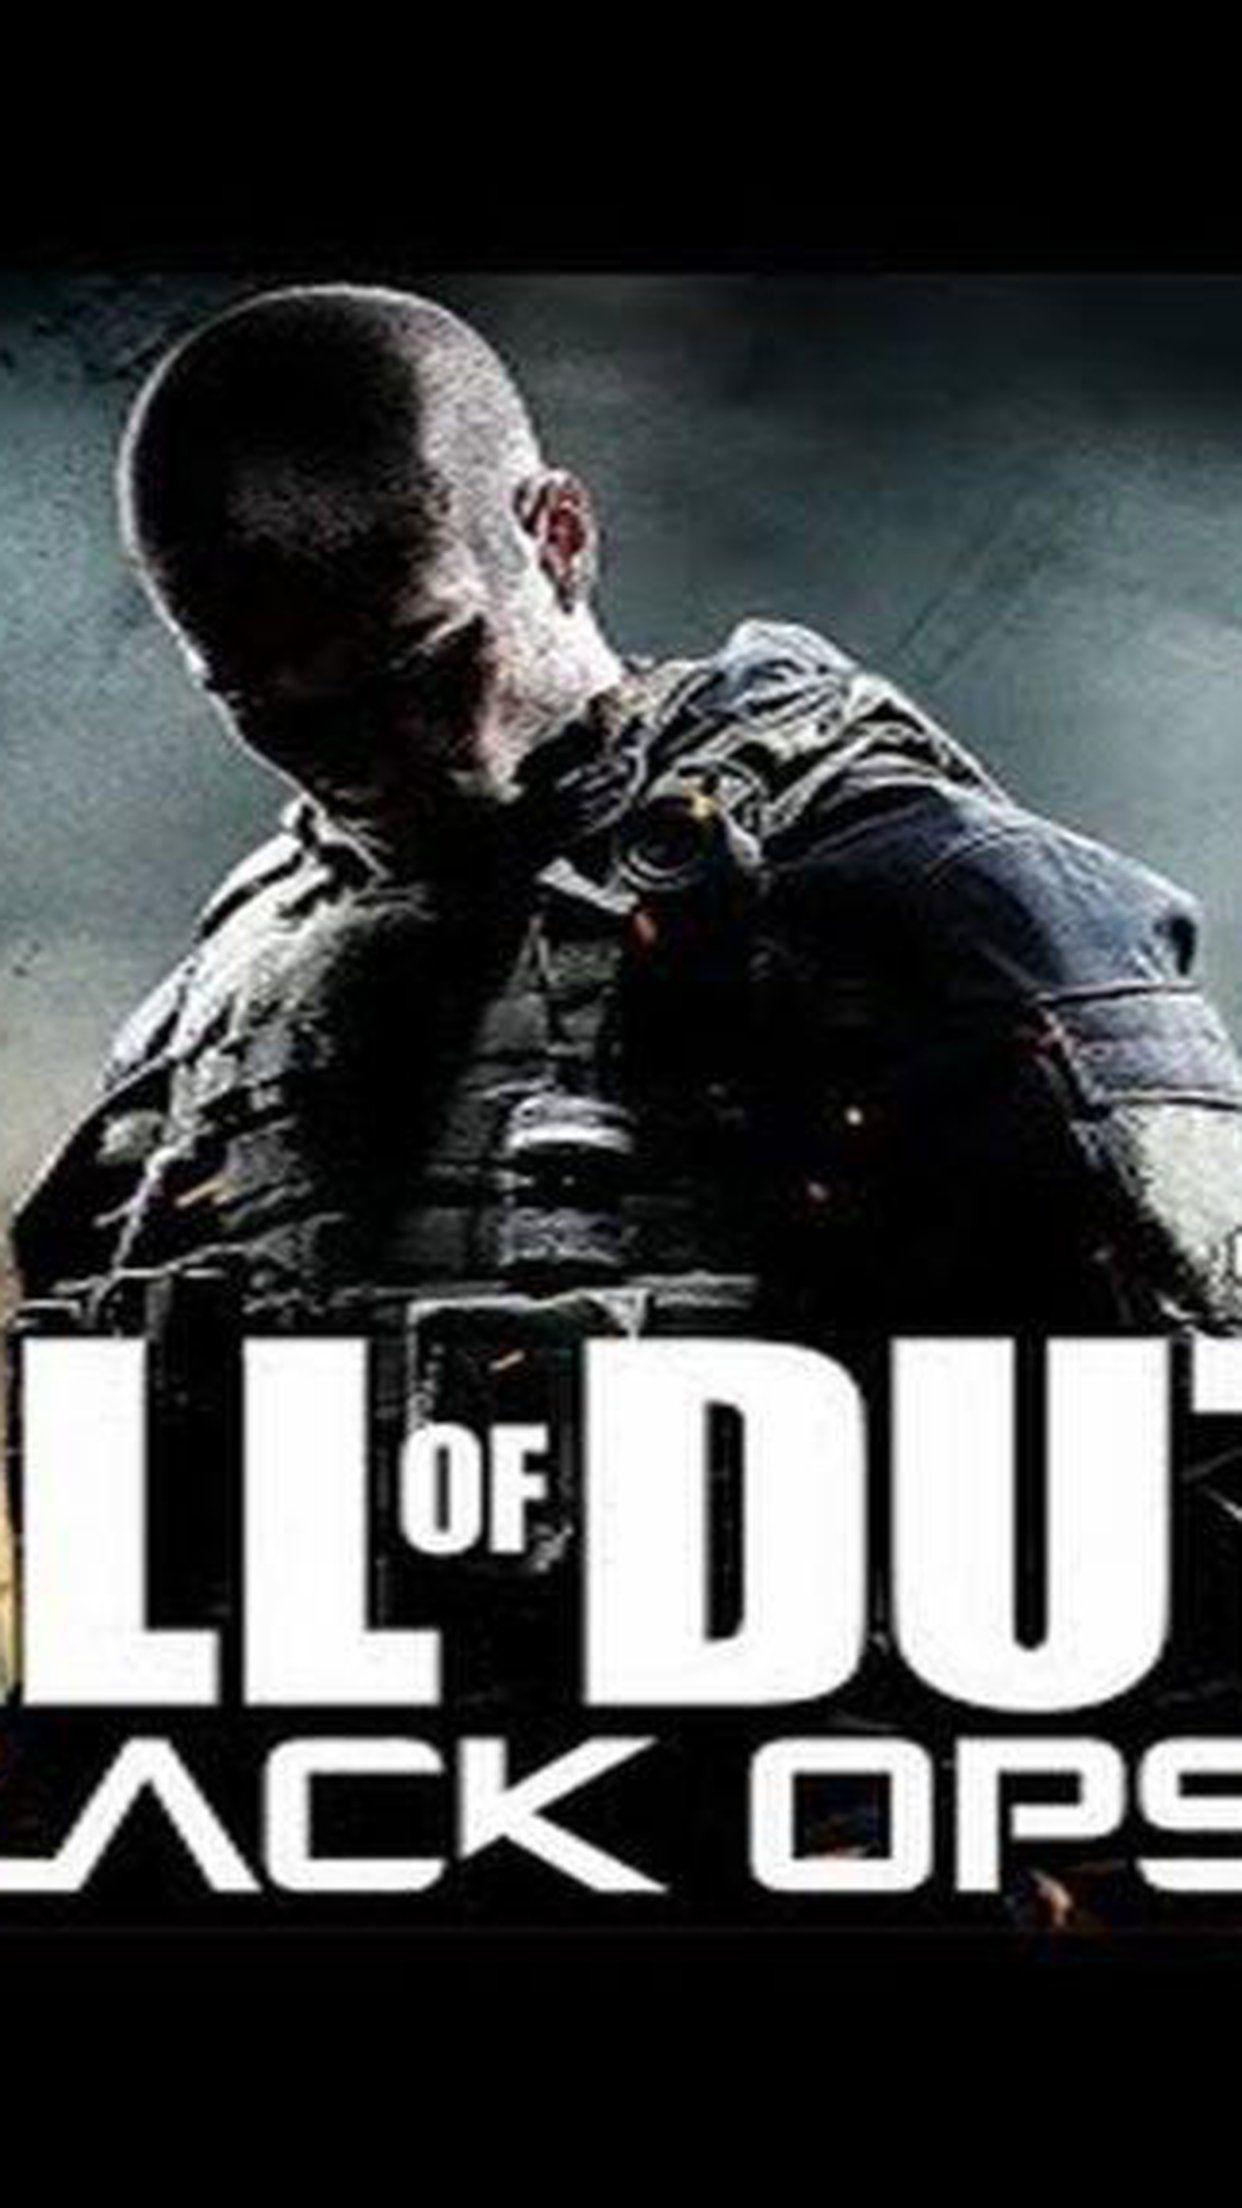 Call Of Duty Black Ops Iphone Wallpapers Top Free Call Of Duty